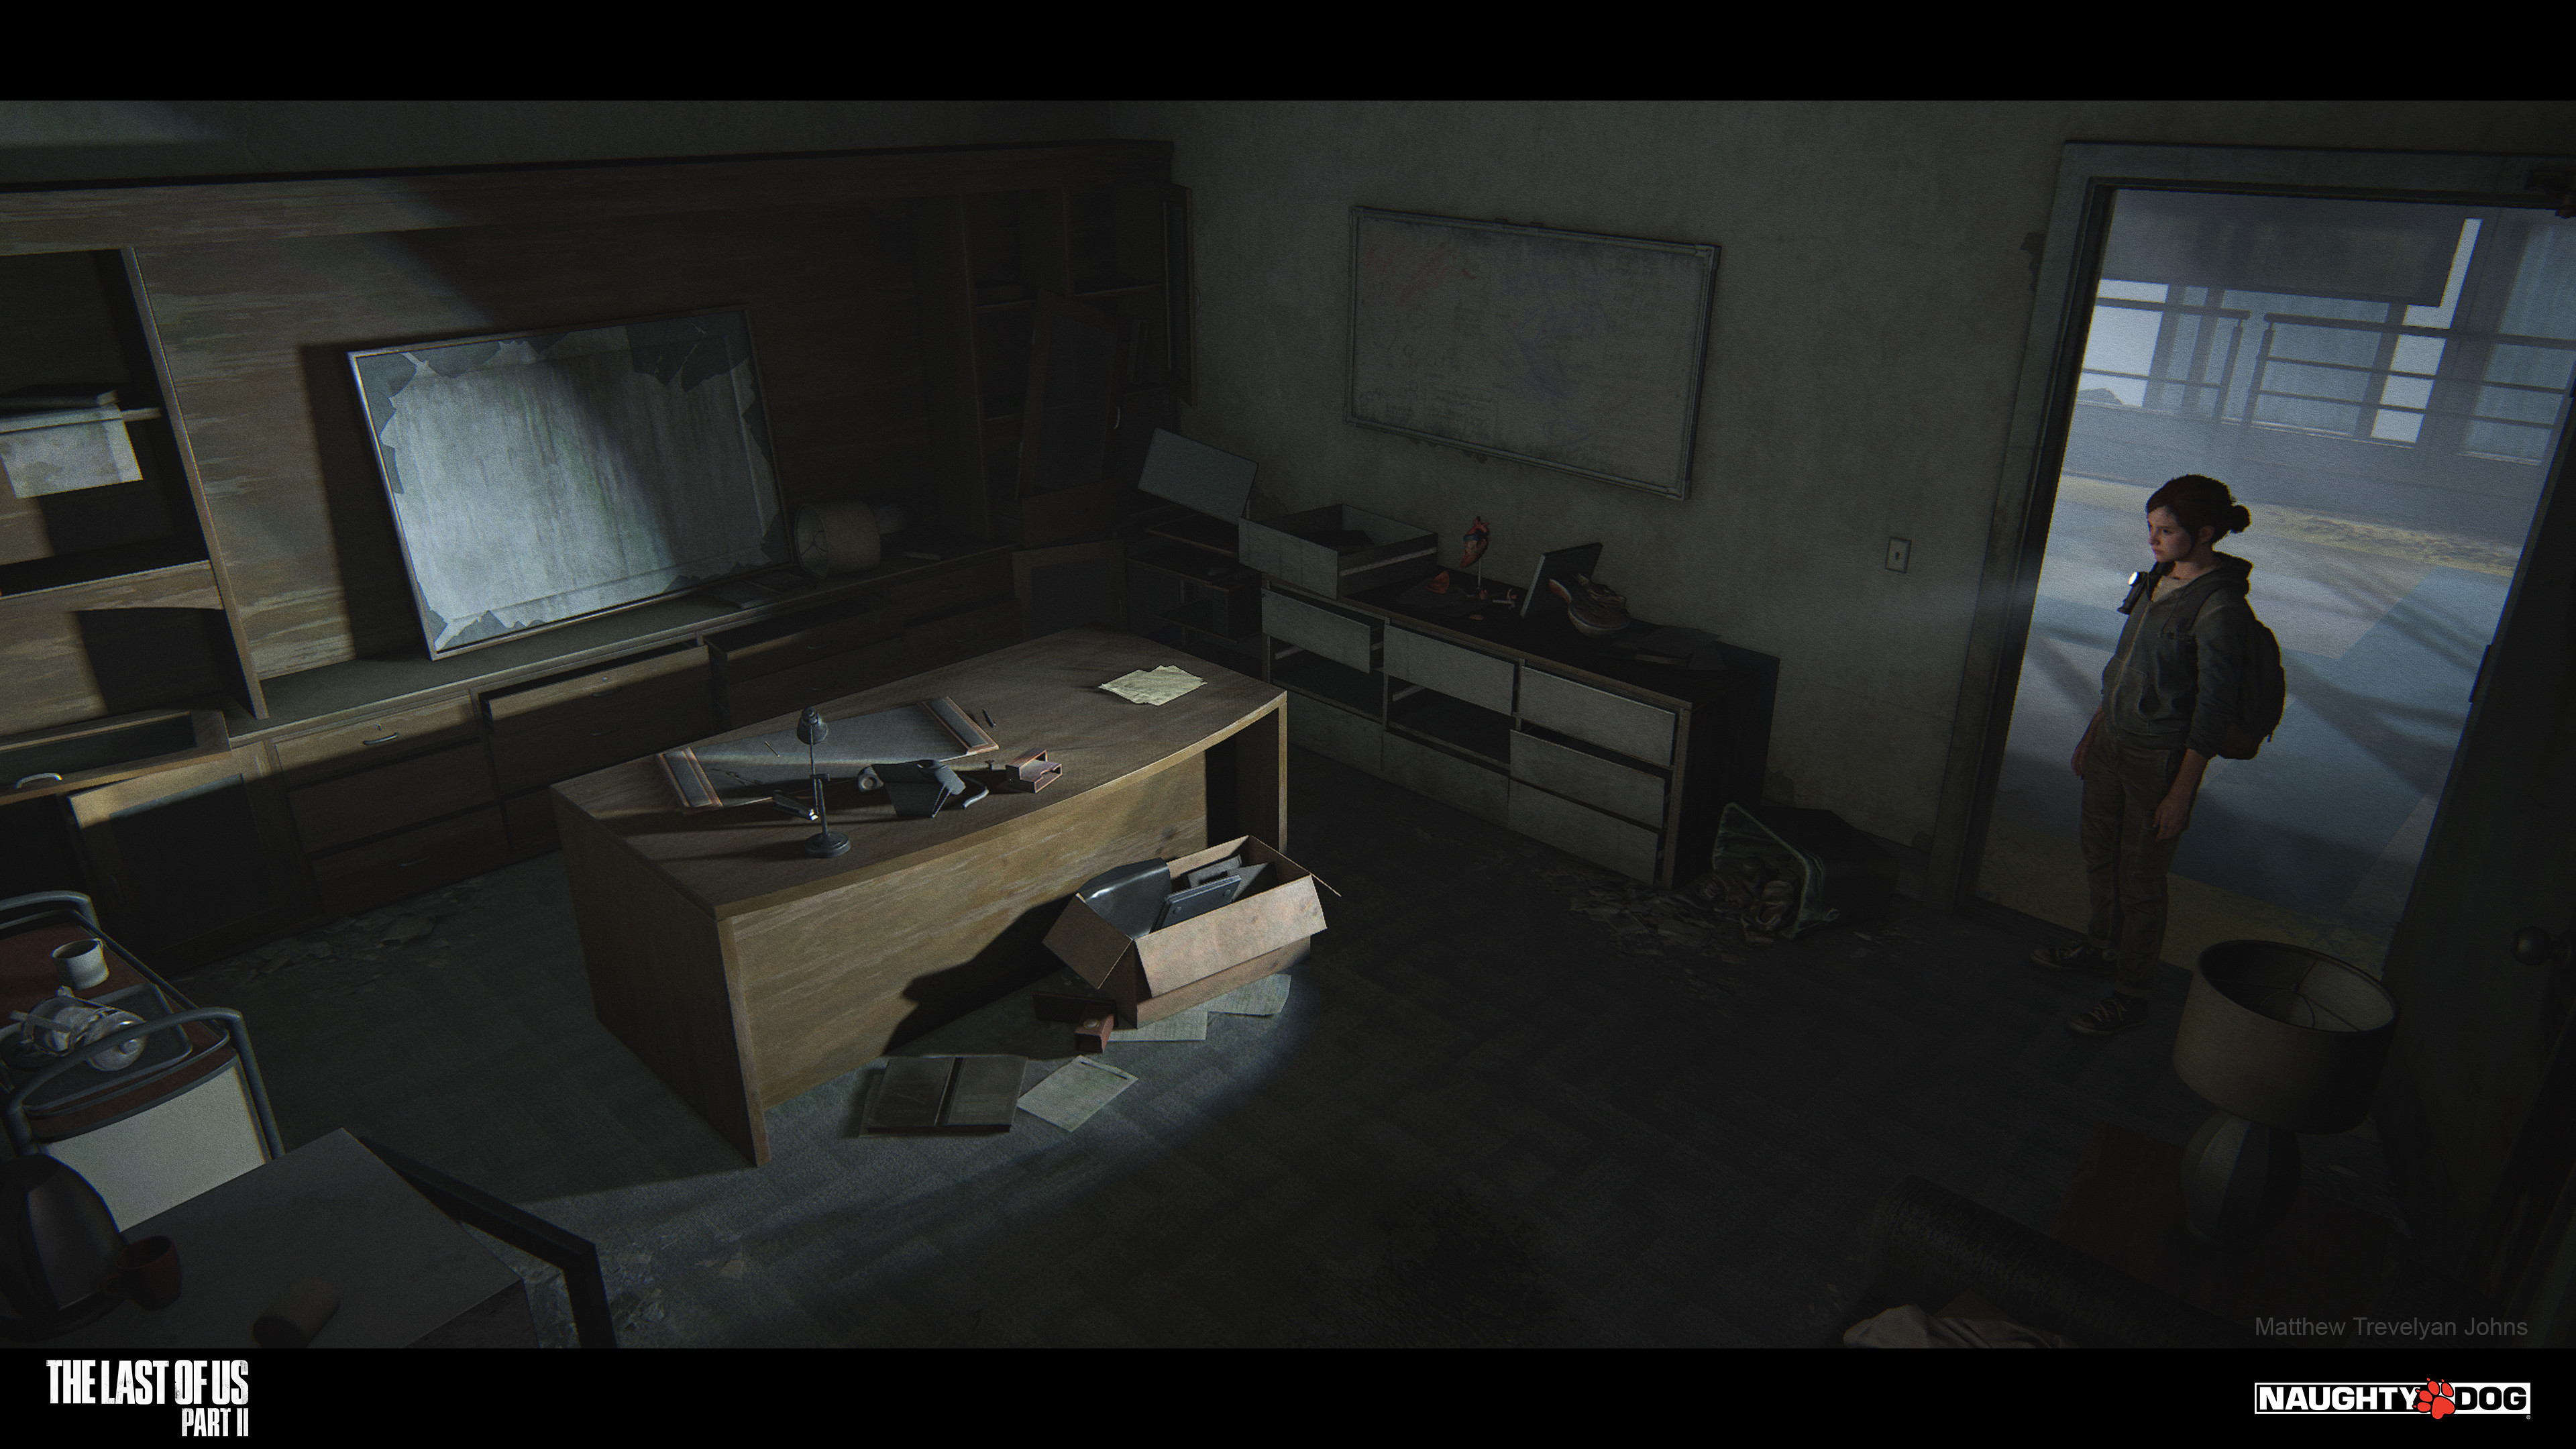 The same process occurred throughout the room, with each minor prop considered, moved, damaged or removed. A box of Jerry's belongings can be seen here in front of the desk also, little does Ellie know it contains scans of her own brain...